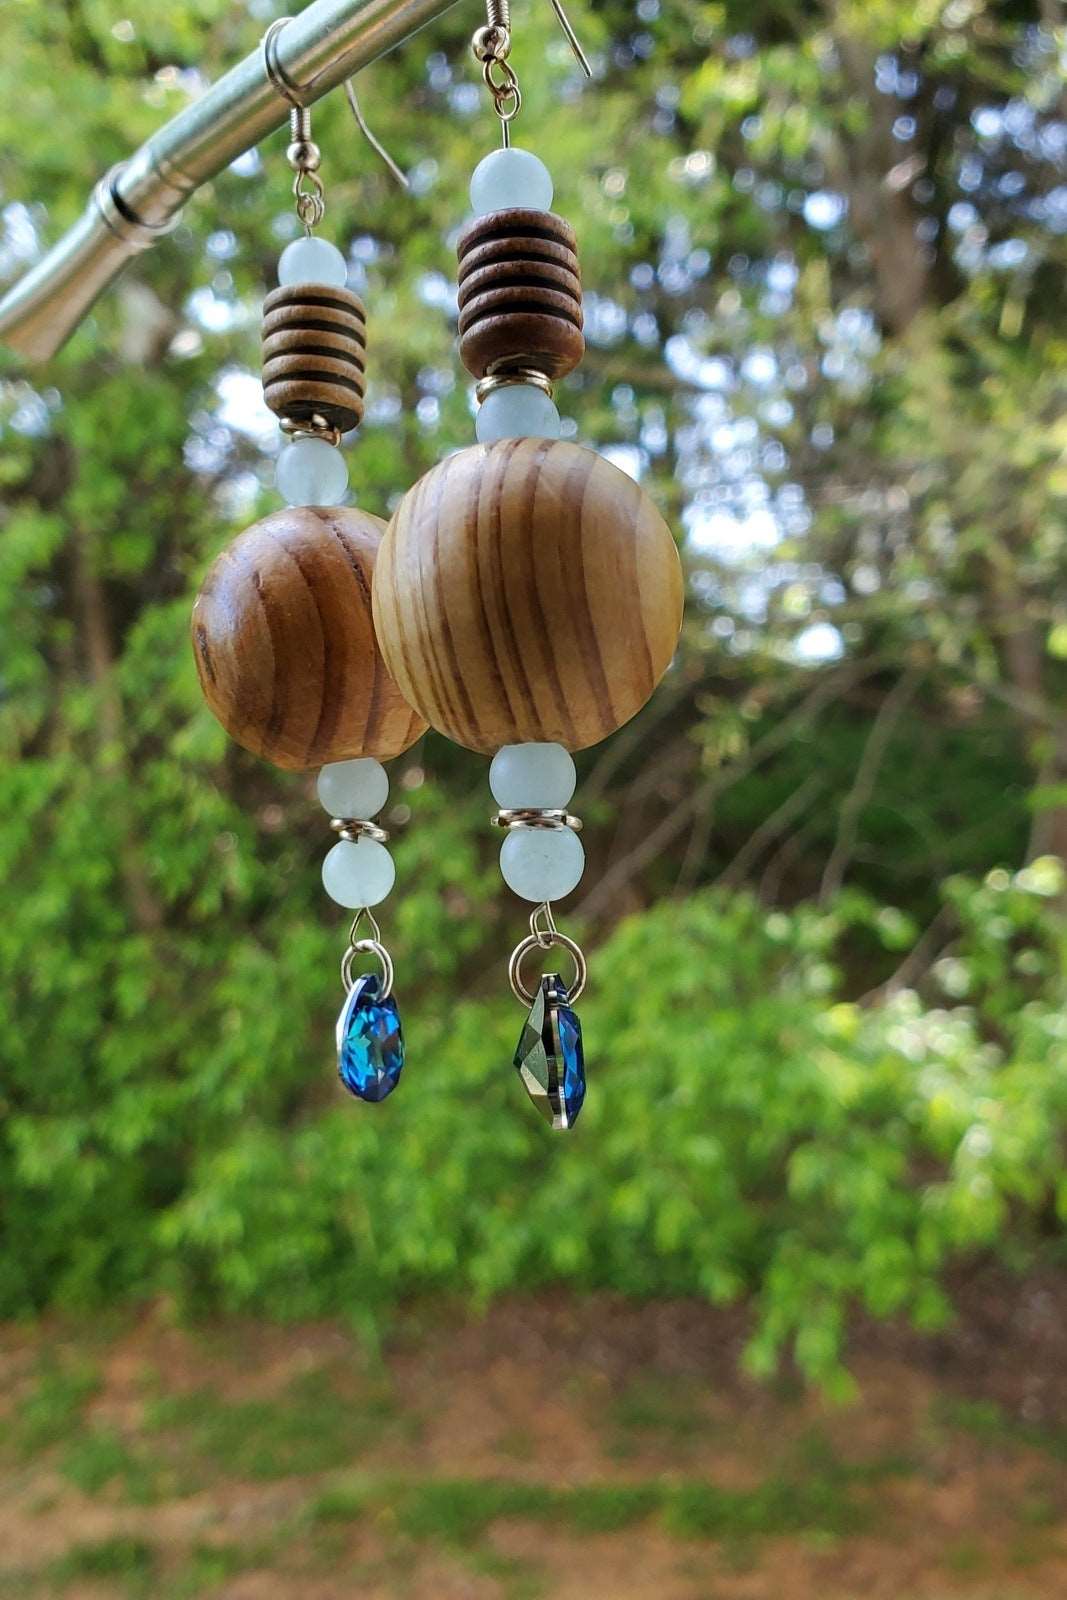 earring handing on metal photo, photo of earrings with outdoor background, wooden earrings for women, handmade earrings, Nina Wooden Bead Earrings